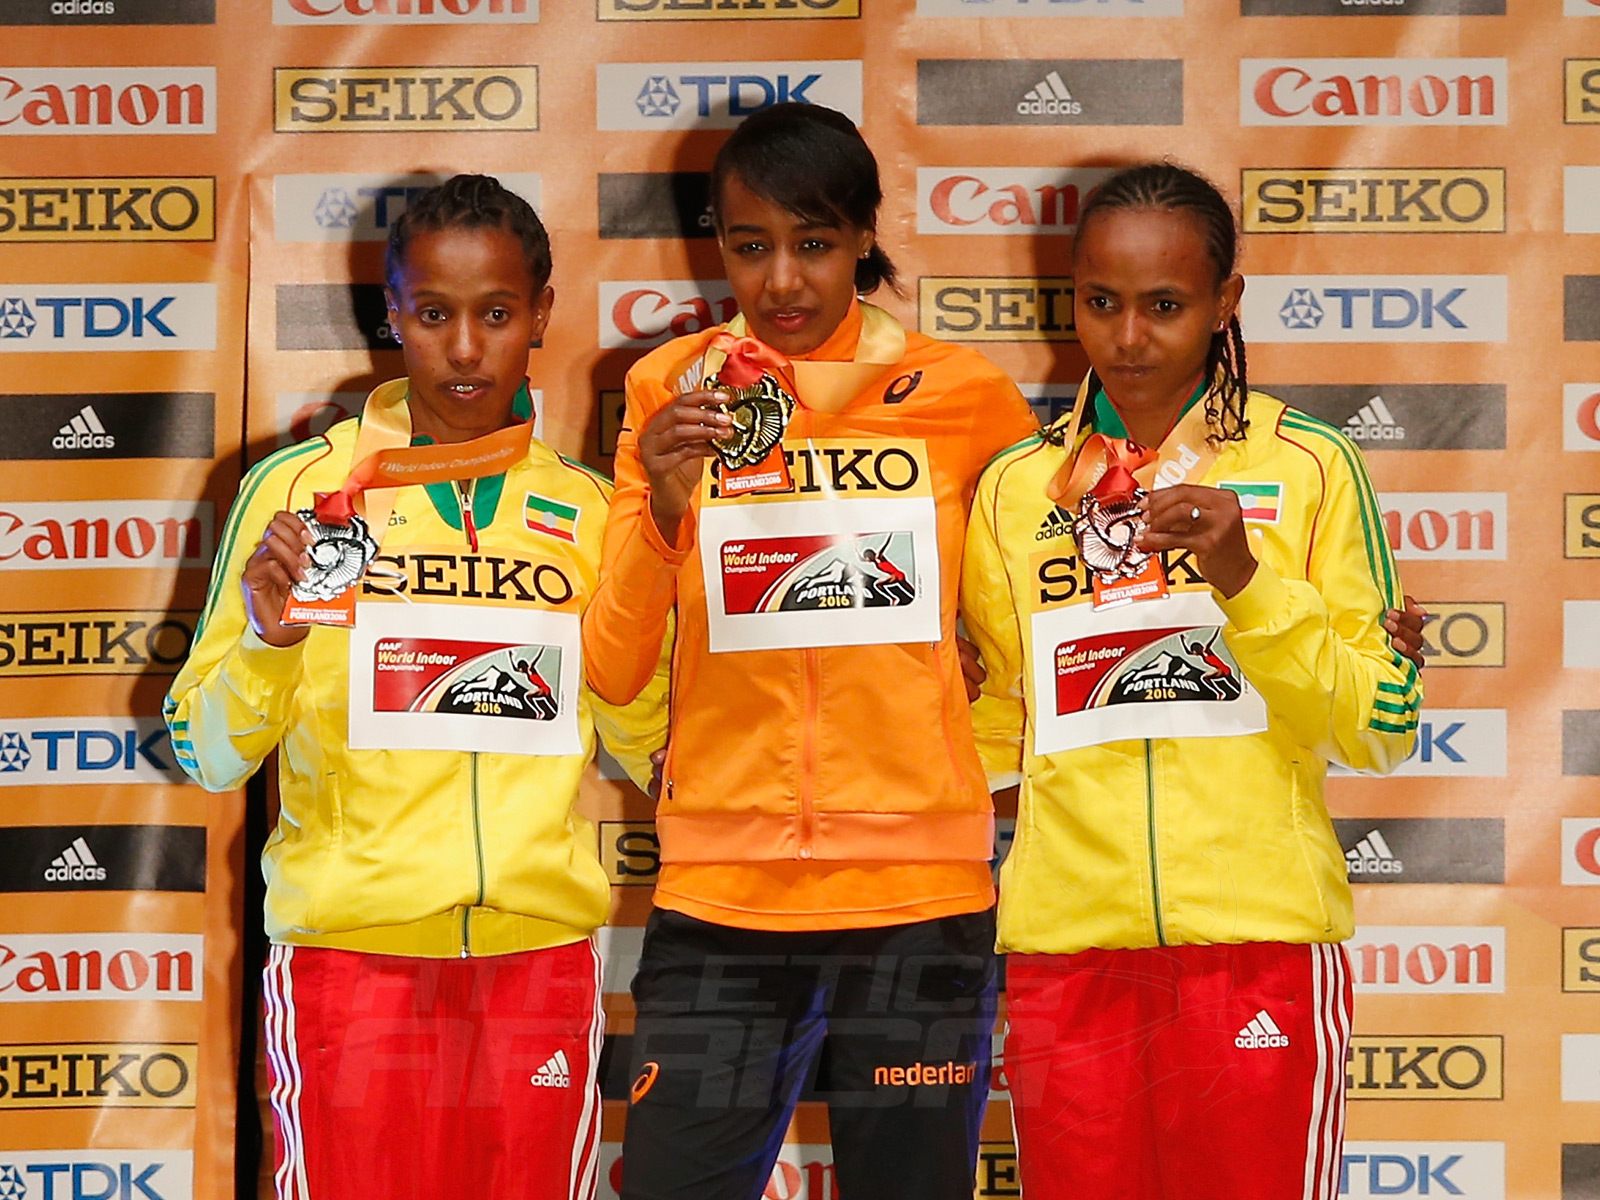 Dawit Seyaum, Sifan Hassan and Gudaf Tsegay on the podium at Portland 2016 / Photo credit: Getty Images for the IAAF.